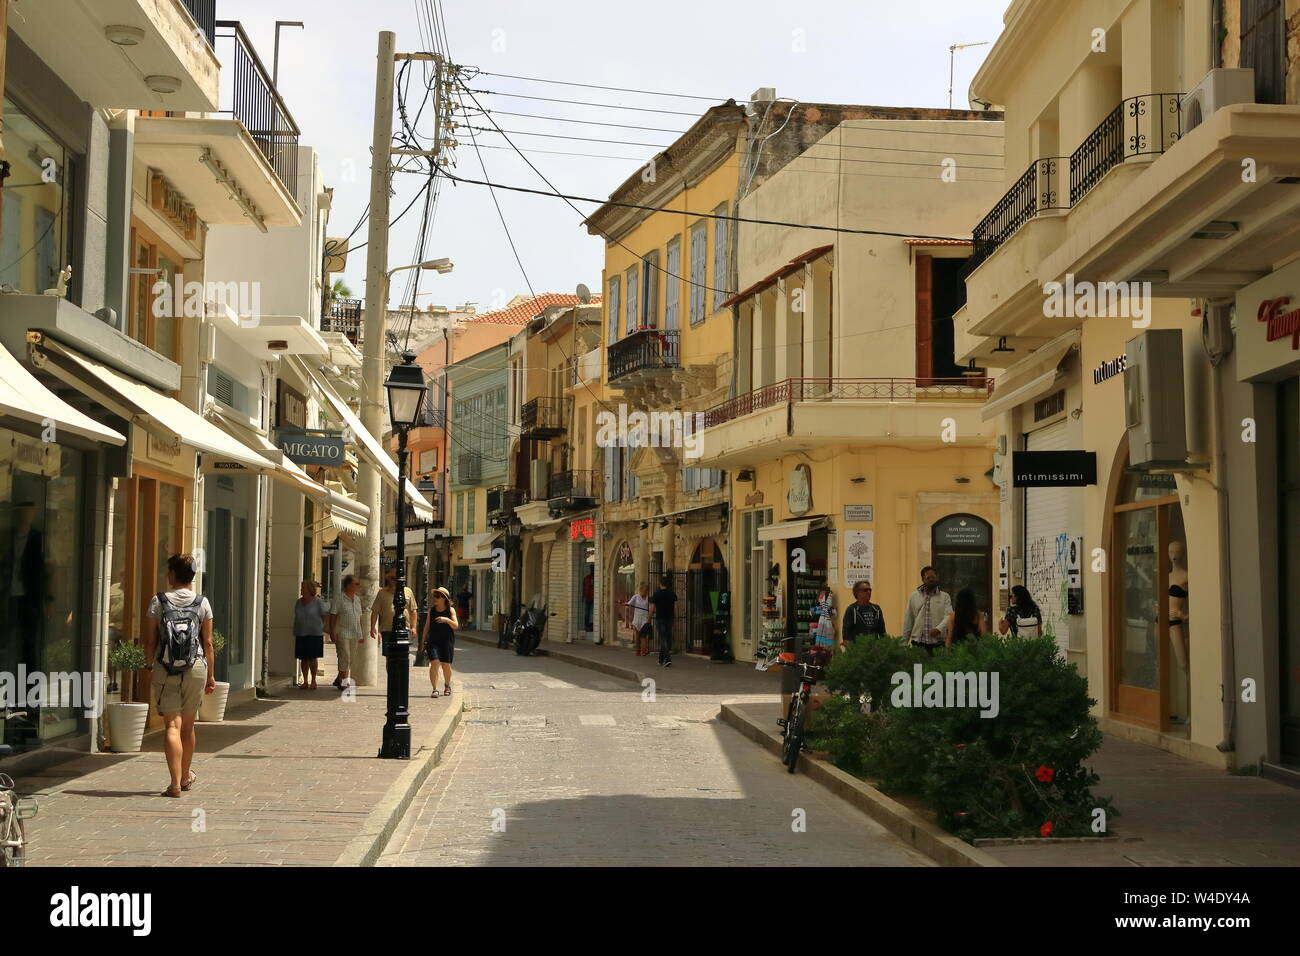 Rethymno, Crete island / Greece - May 28 2019: Charming old town Rethymno  in Crete in Greece Stock Photo - Alamy